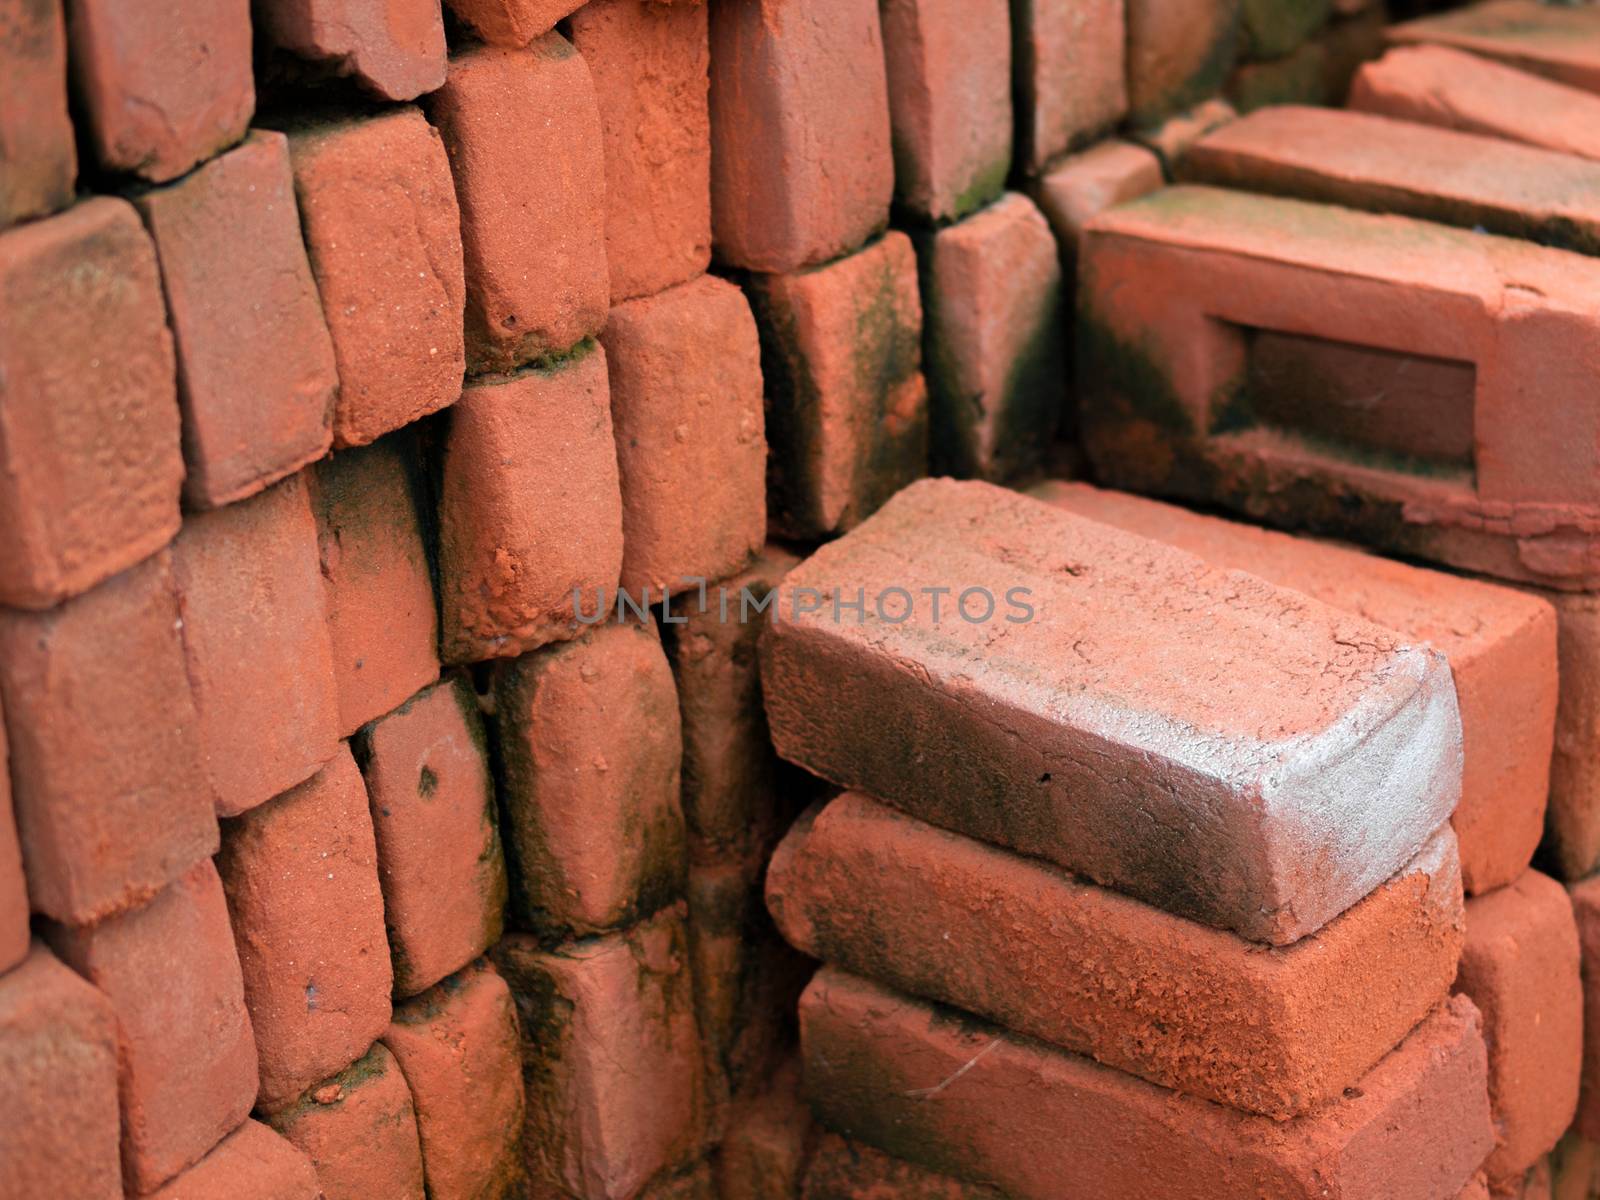 COLOR PHOTO OF PILE OF RED CLAY BRICKS